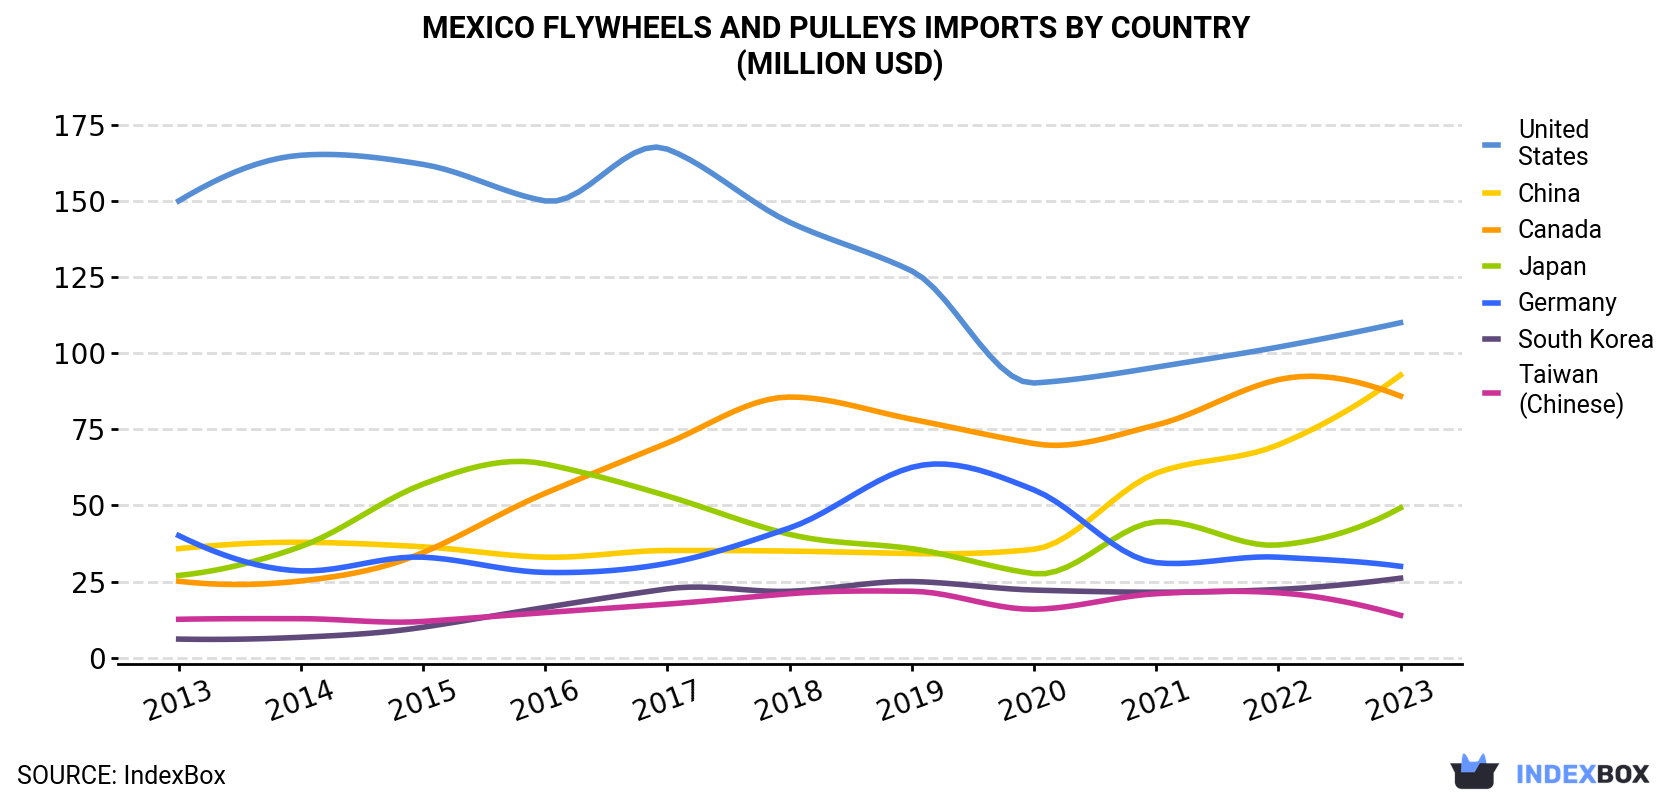 Mexico Flywheels And Pulleys Imports By Country (Million USD)